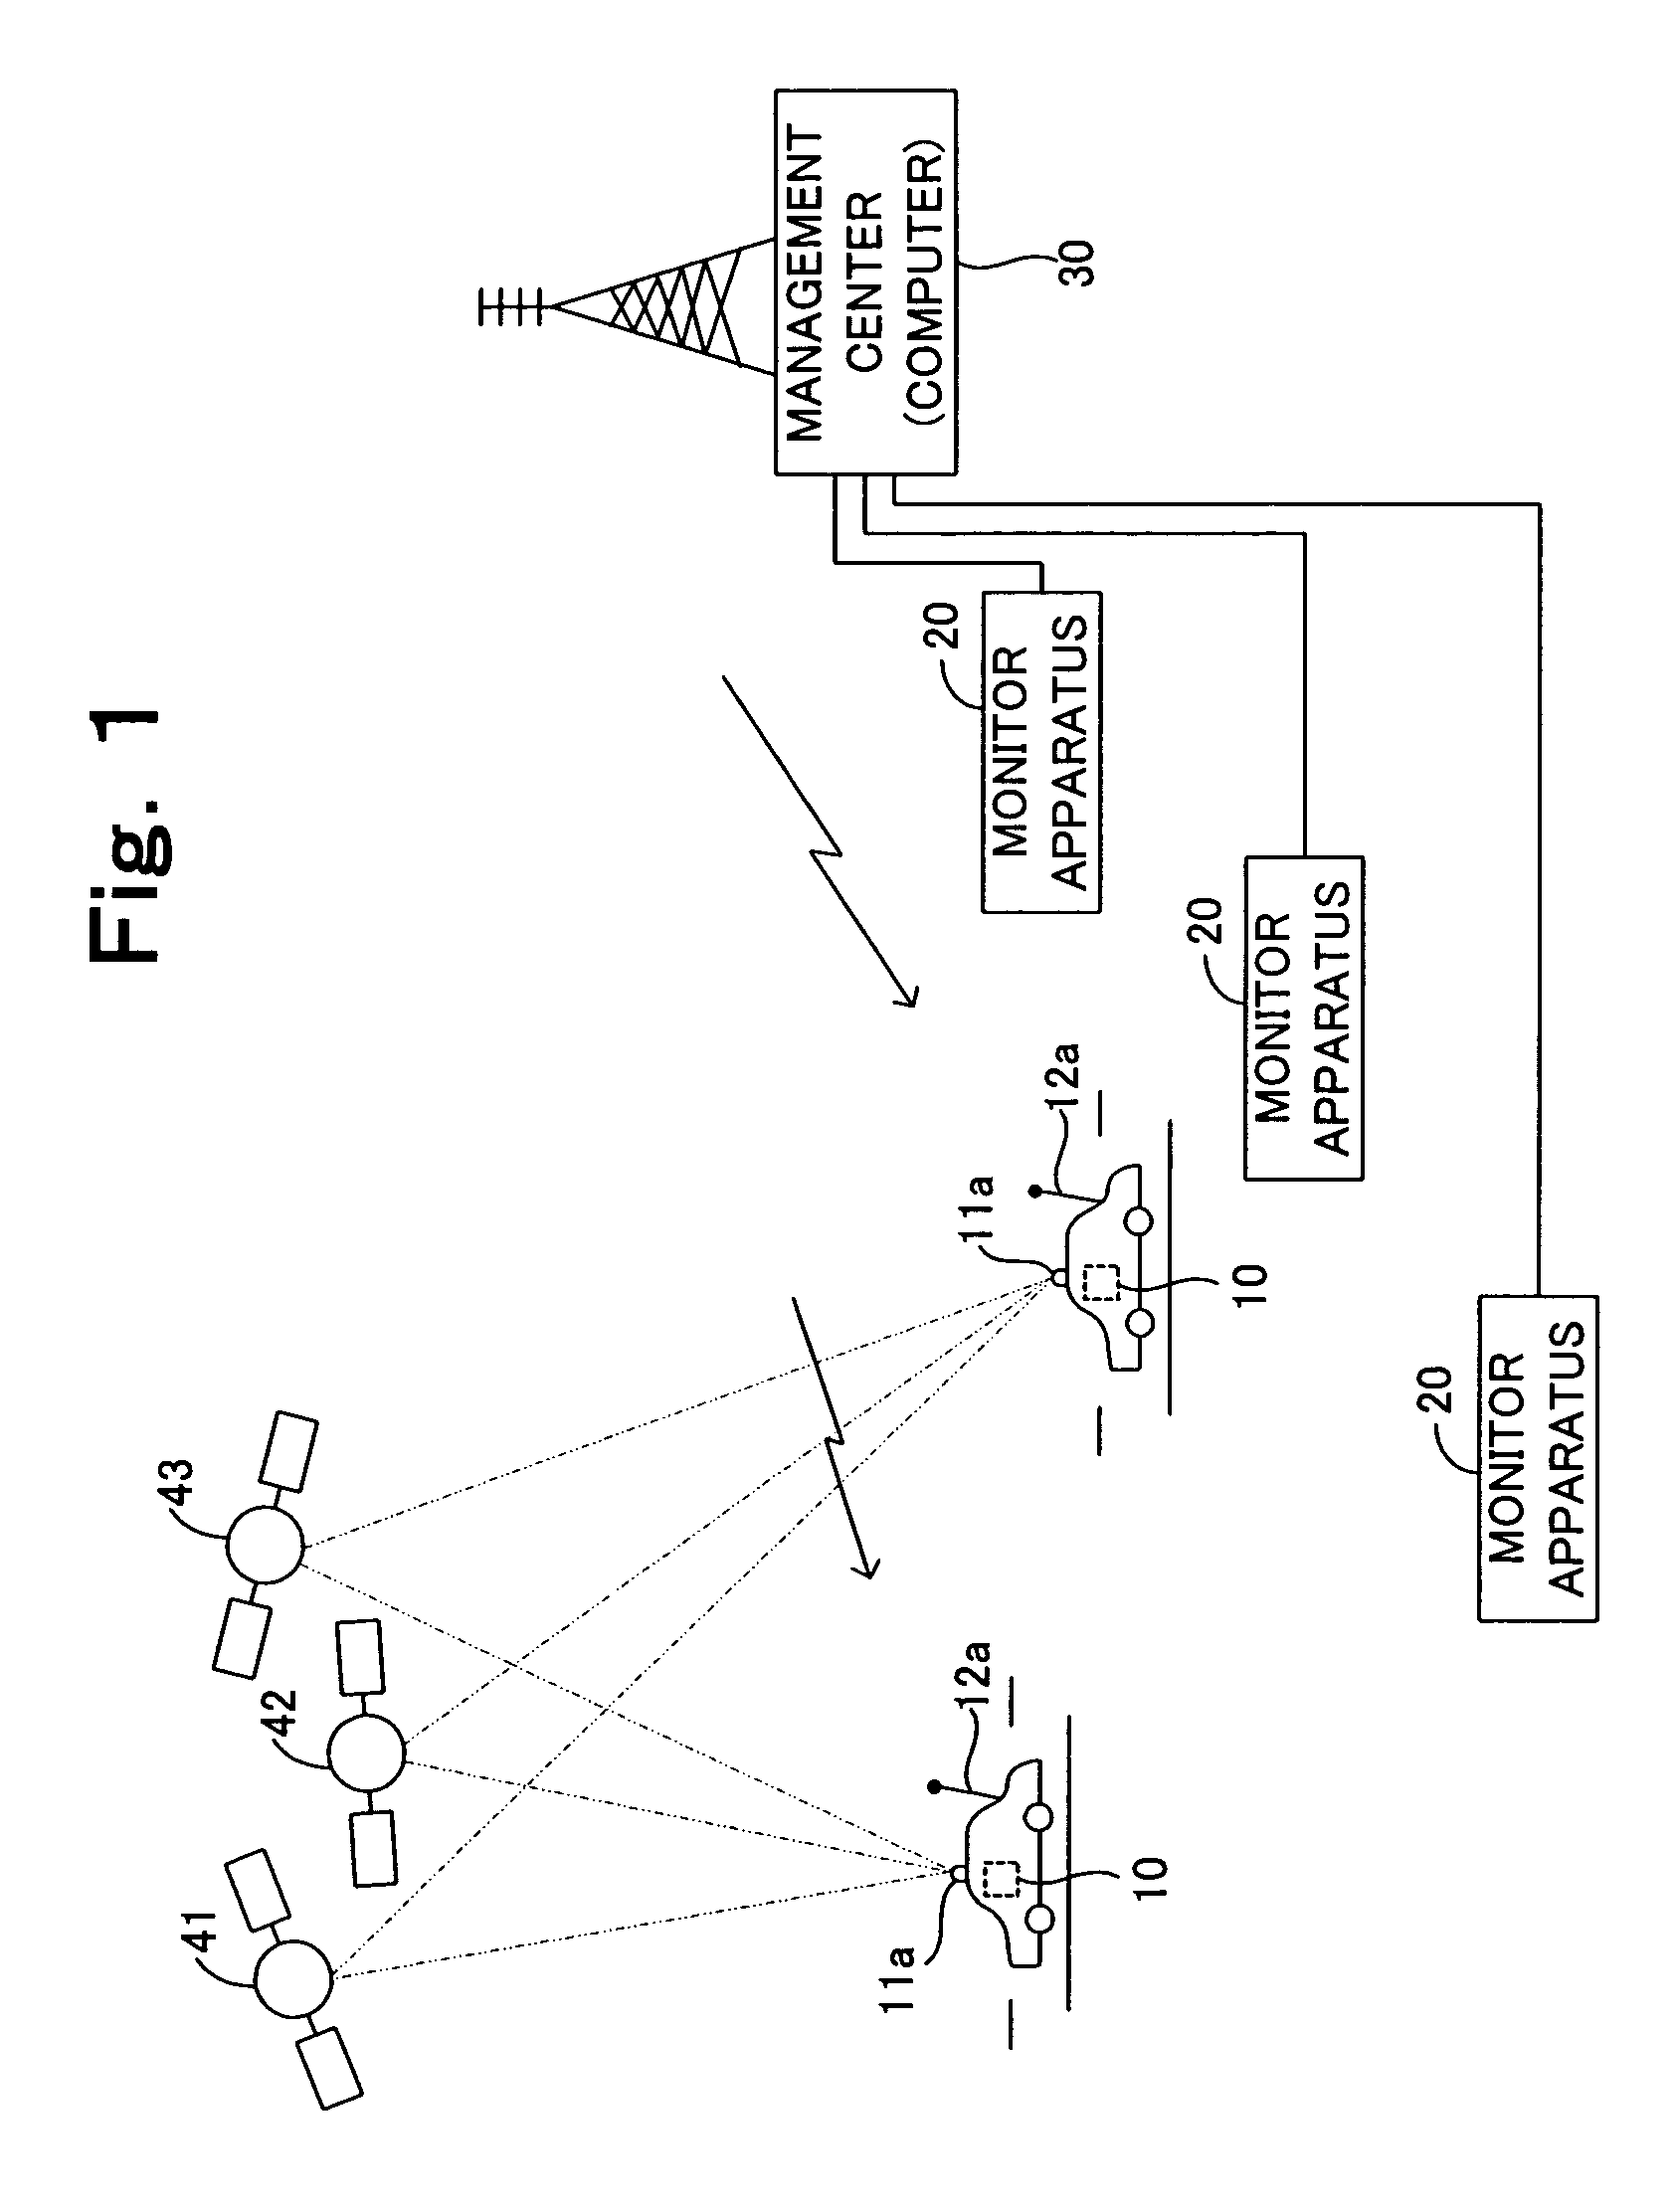 Monitoring system for automatic charging apparatus for vehicle